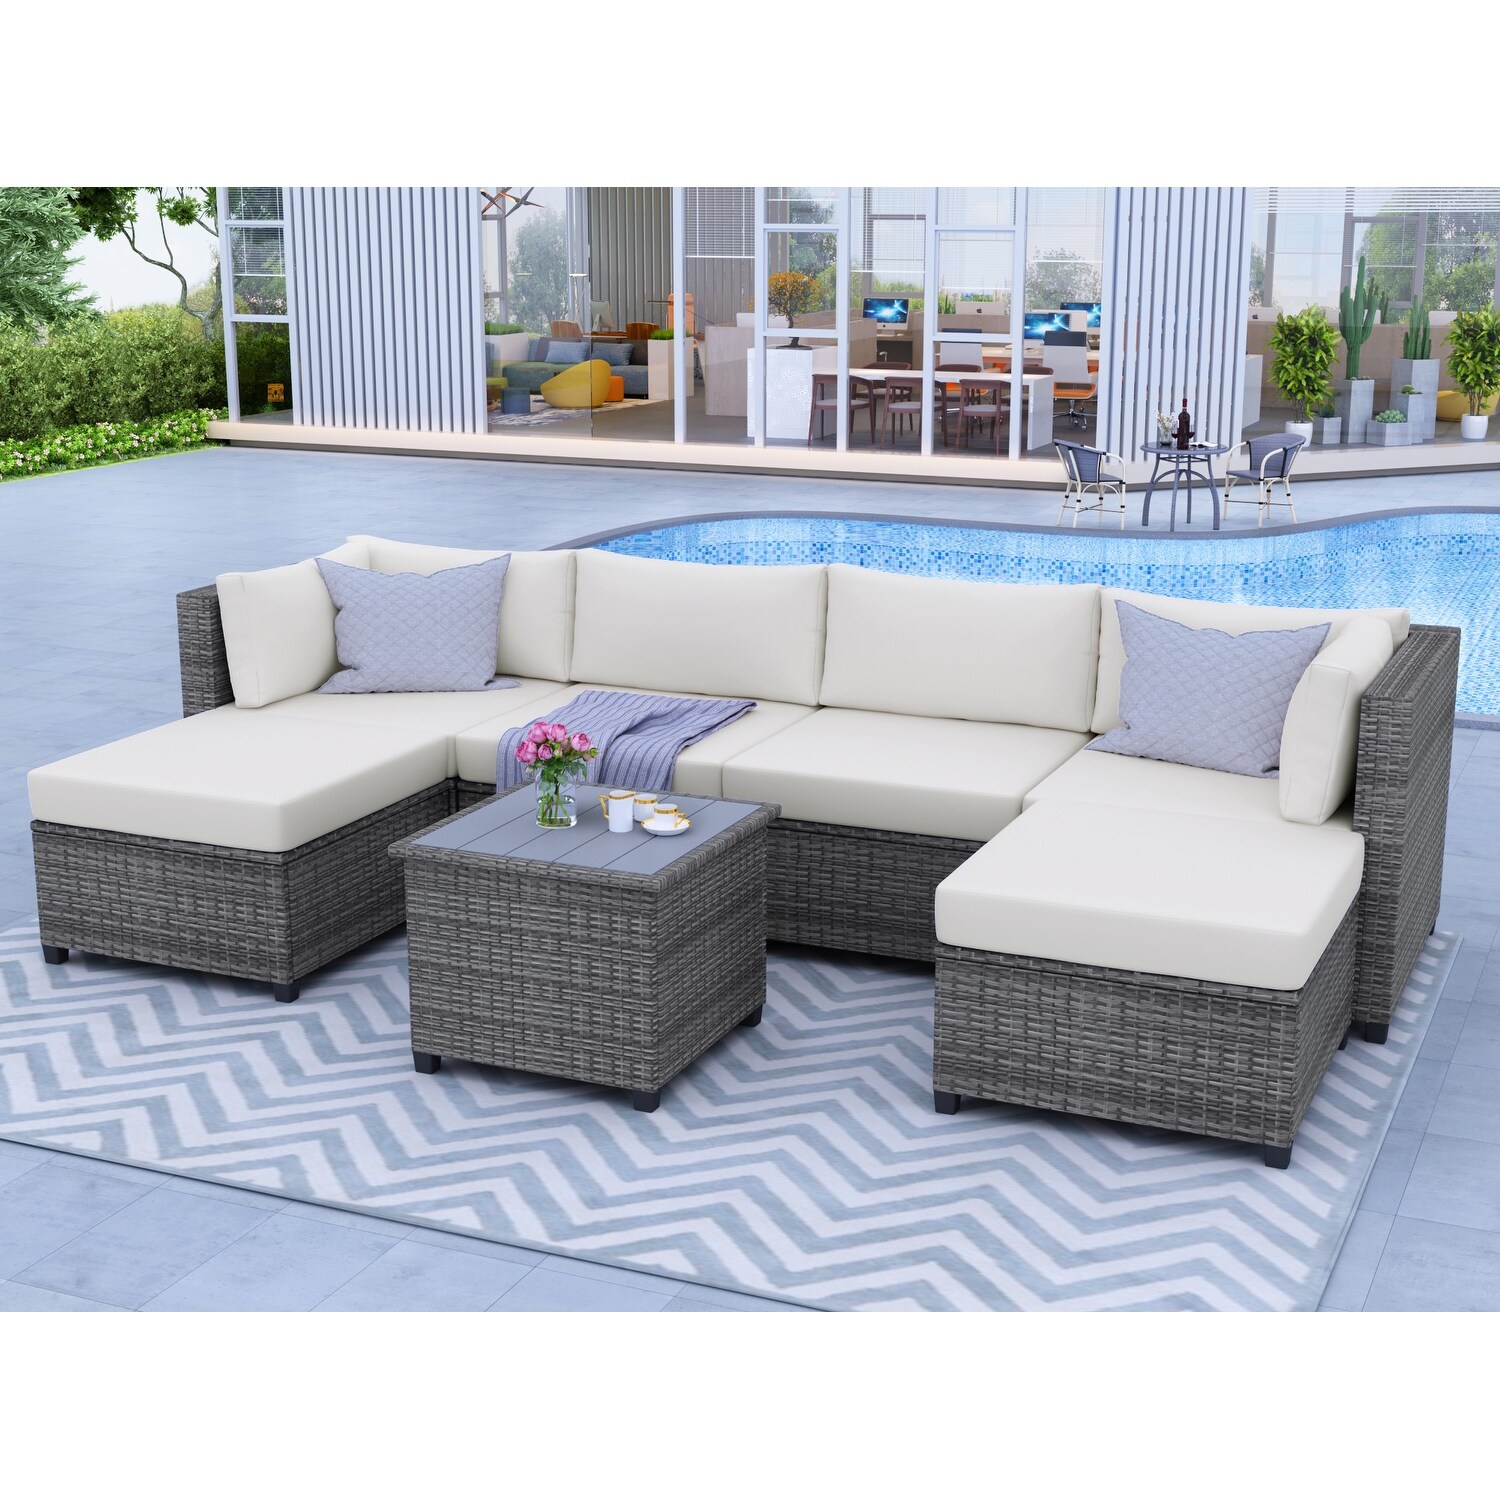 7 Piece Rattan Sectional Seating Group With Cushions  Outdoor Ratten Sofa New!